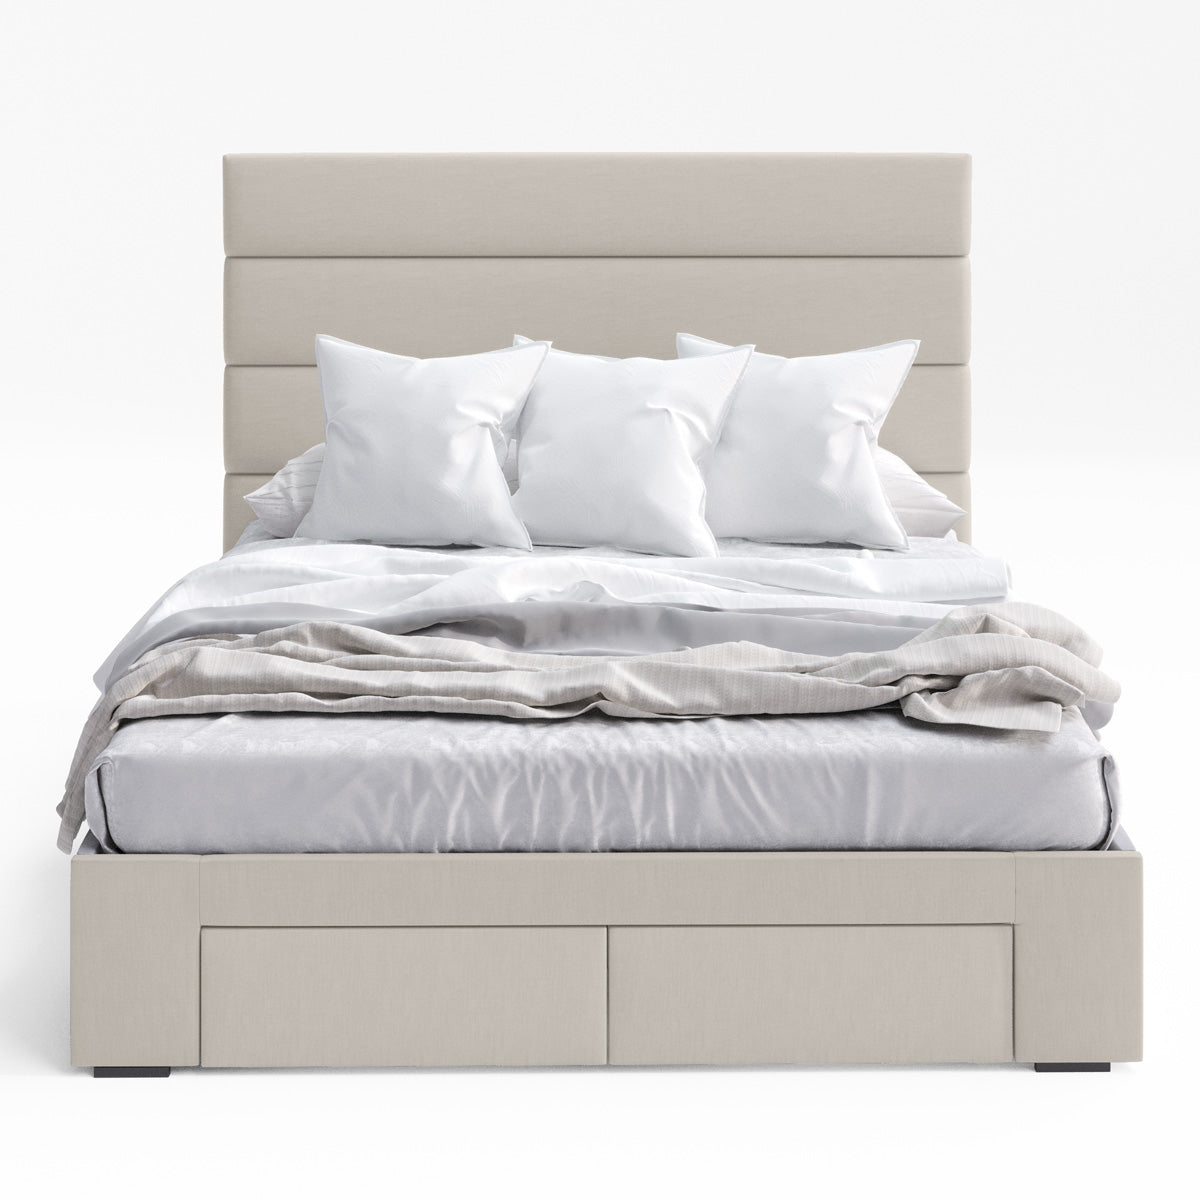 Benny Bed Frame with Four Storage Drawers (Natural Beige Fabric)